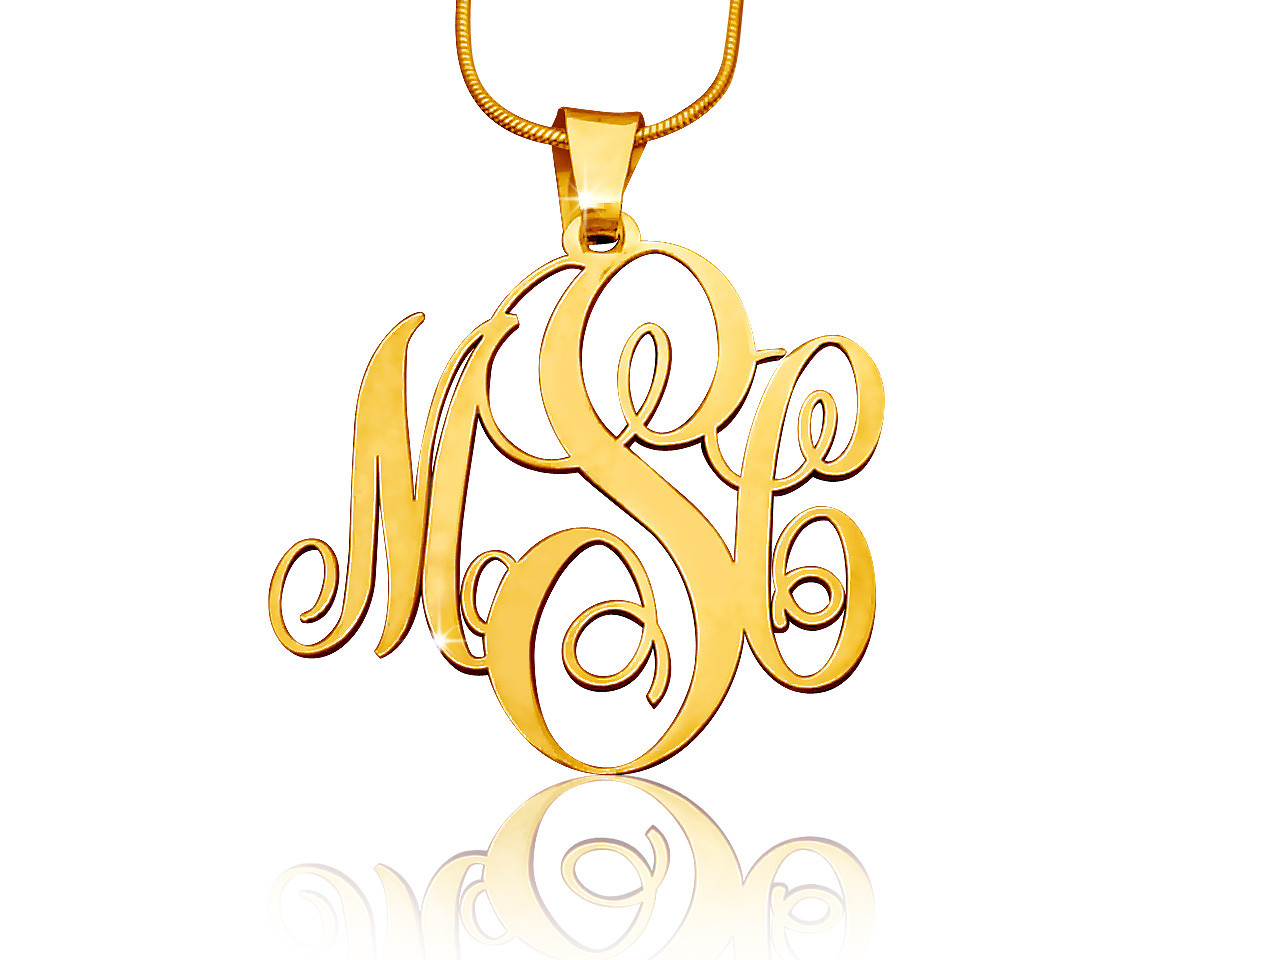 Custom made monogram pendant with personalized initials in script font